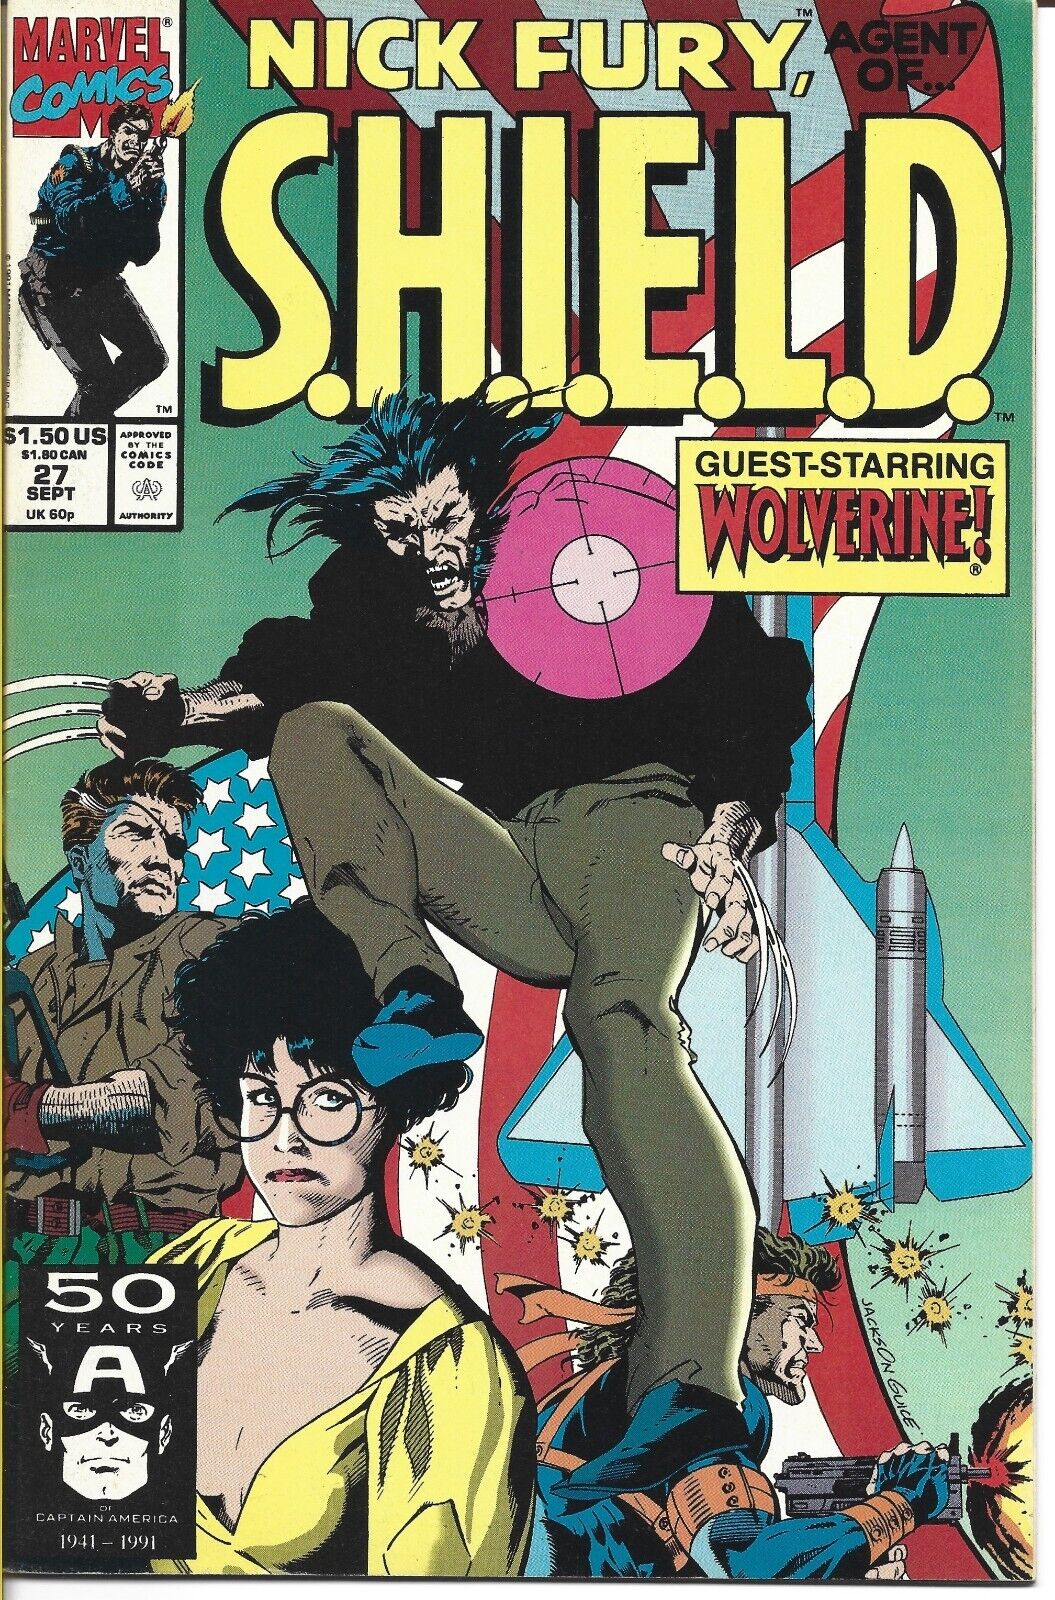 NICK FURY AGENT OF S.H.I.E.L.D. #27 MARVEL COMICS 1991 BAGGED AND BOARDED